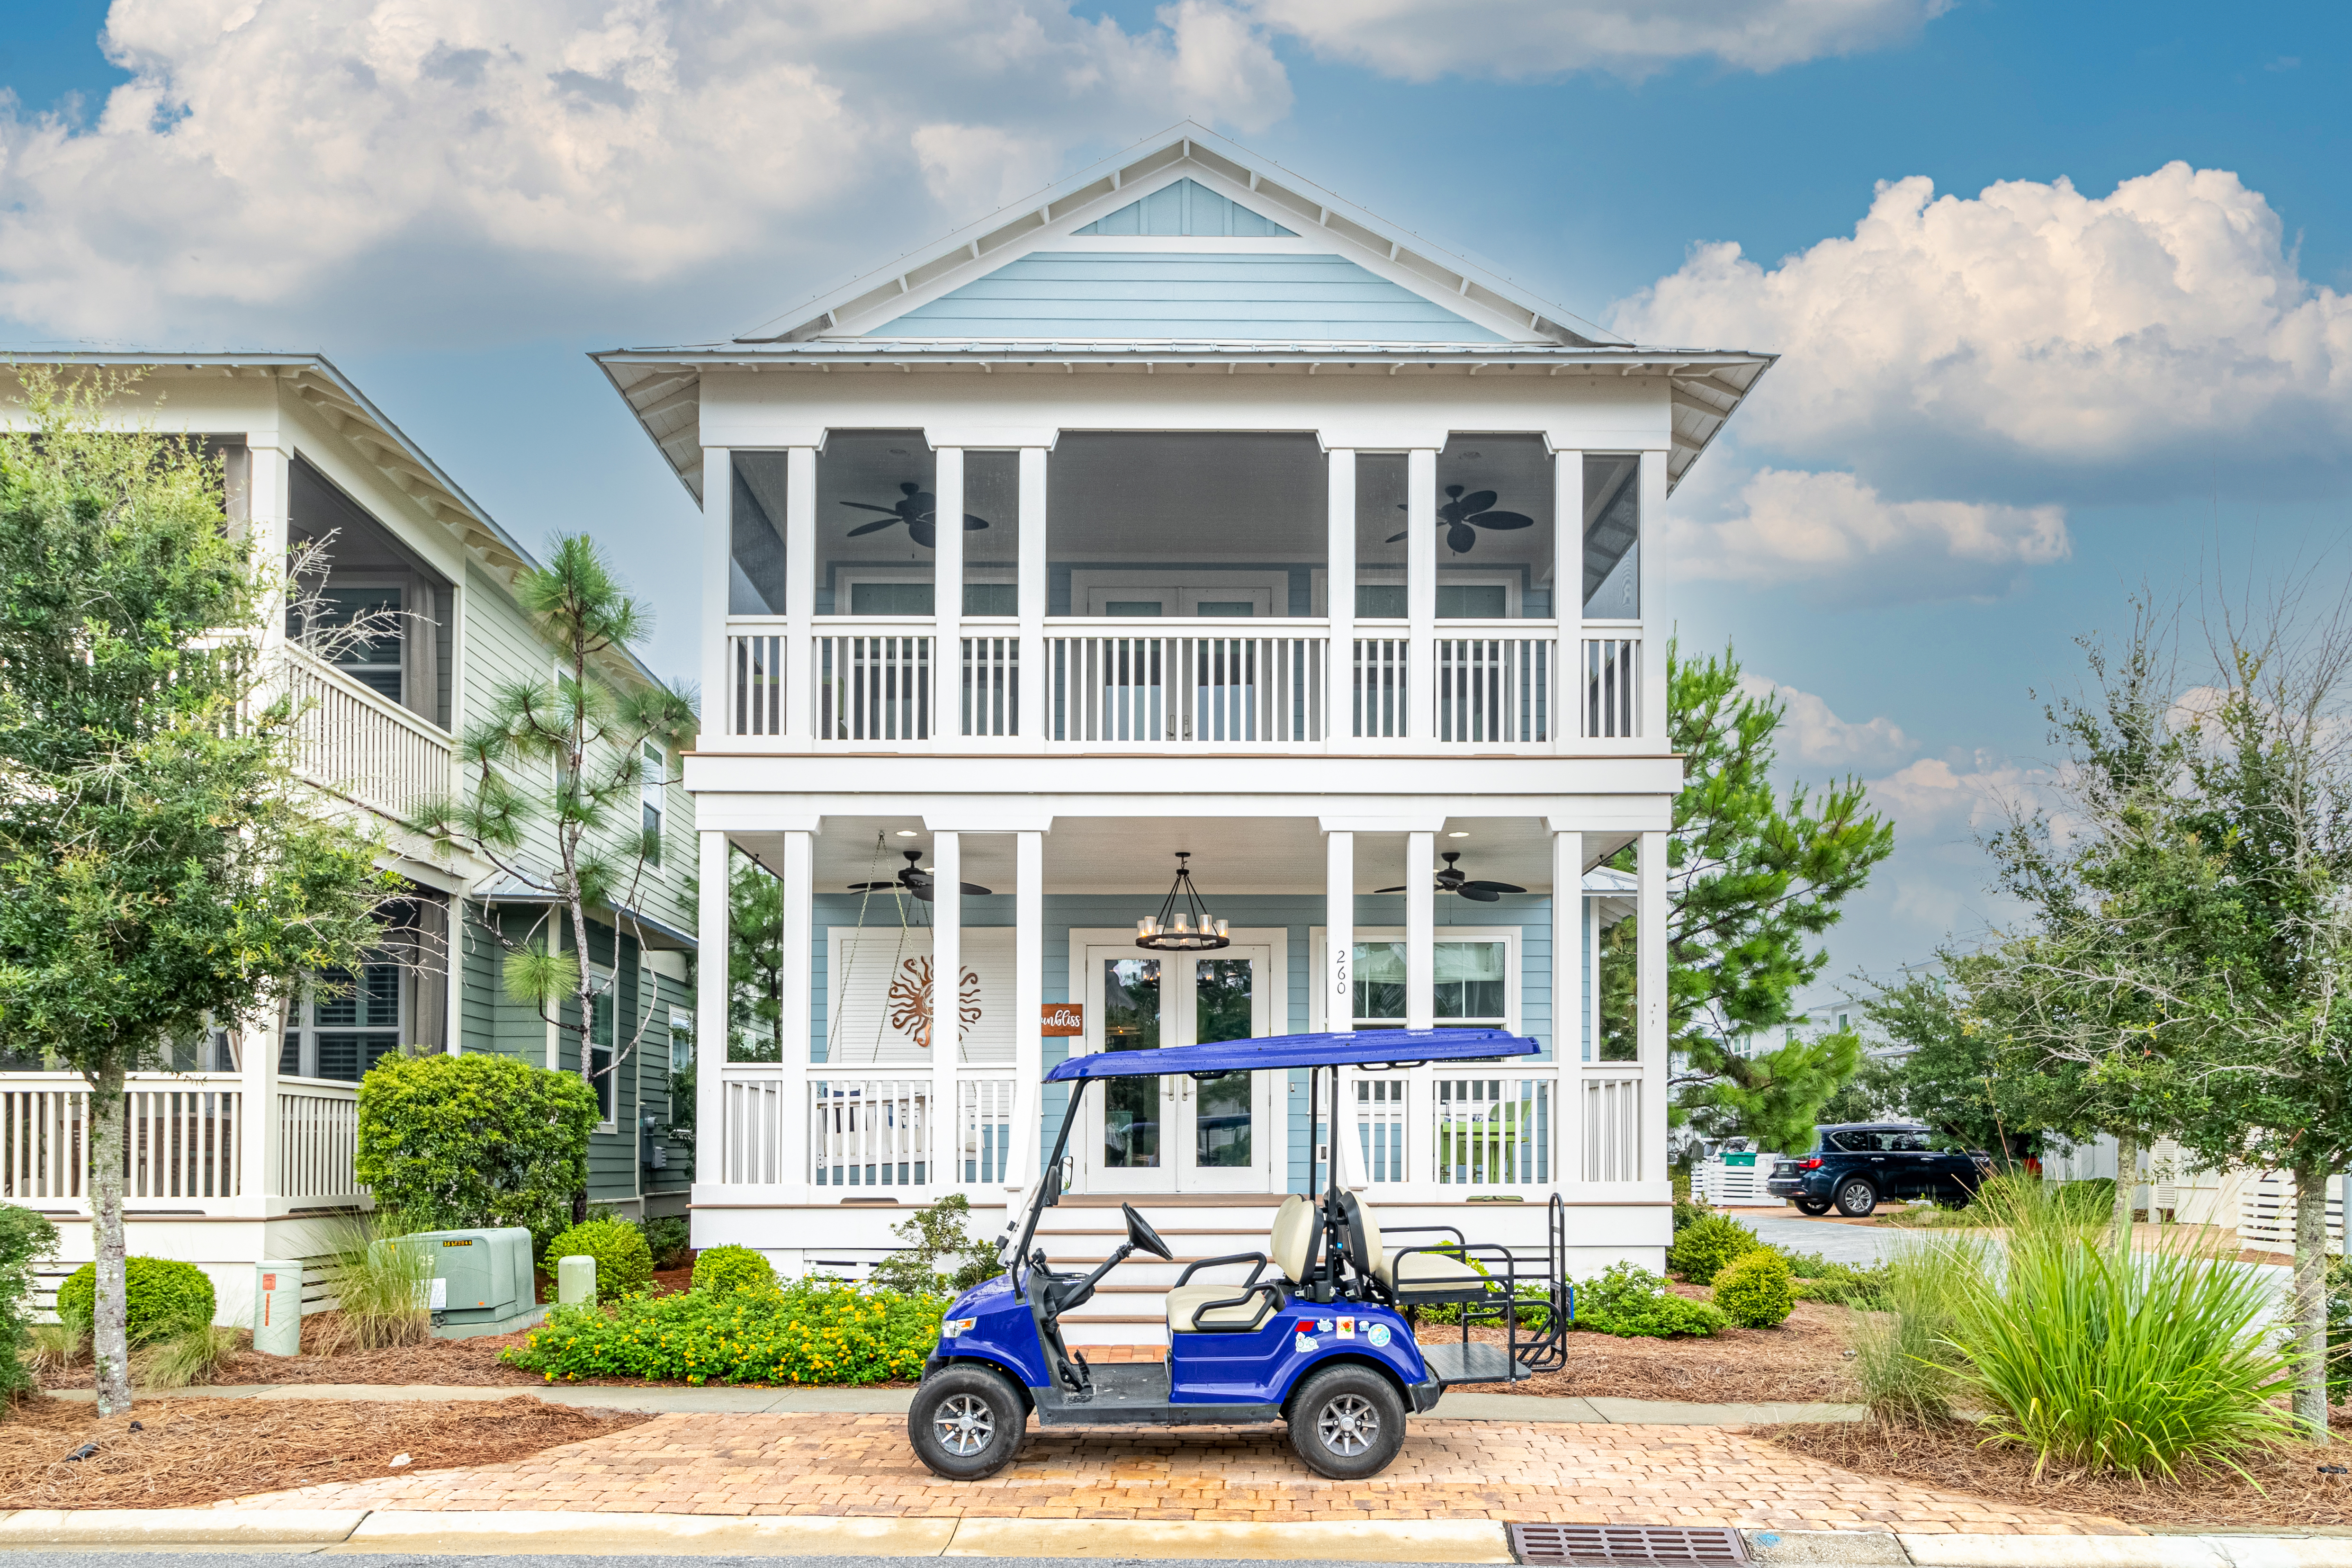 Fully Fursnished Beach Cottage With Two Car Garage And Golf Cart